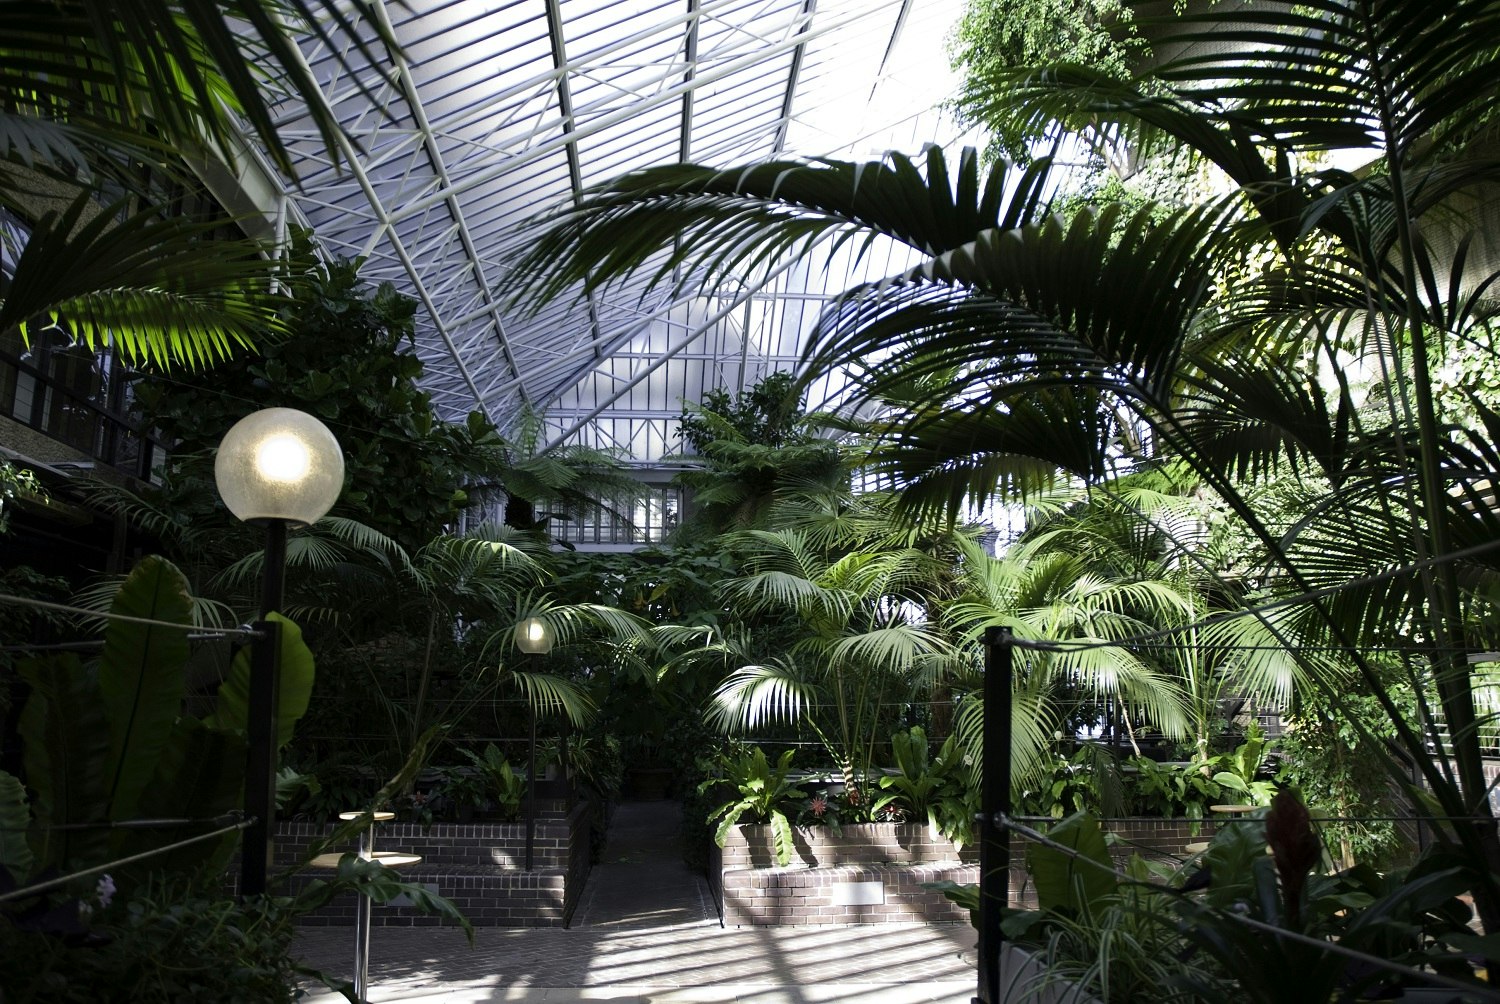 The Barbican Conservatory